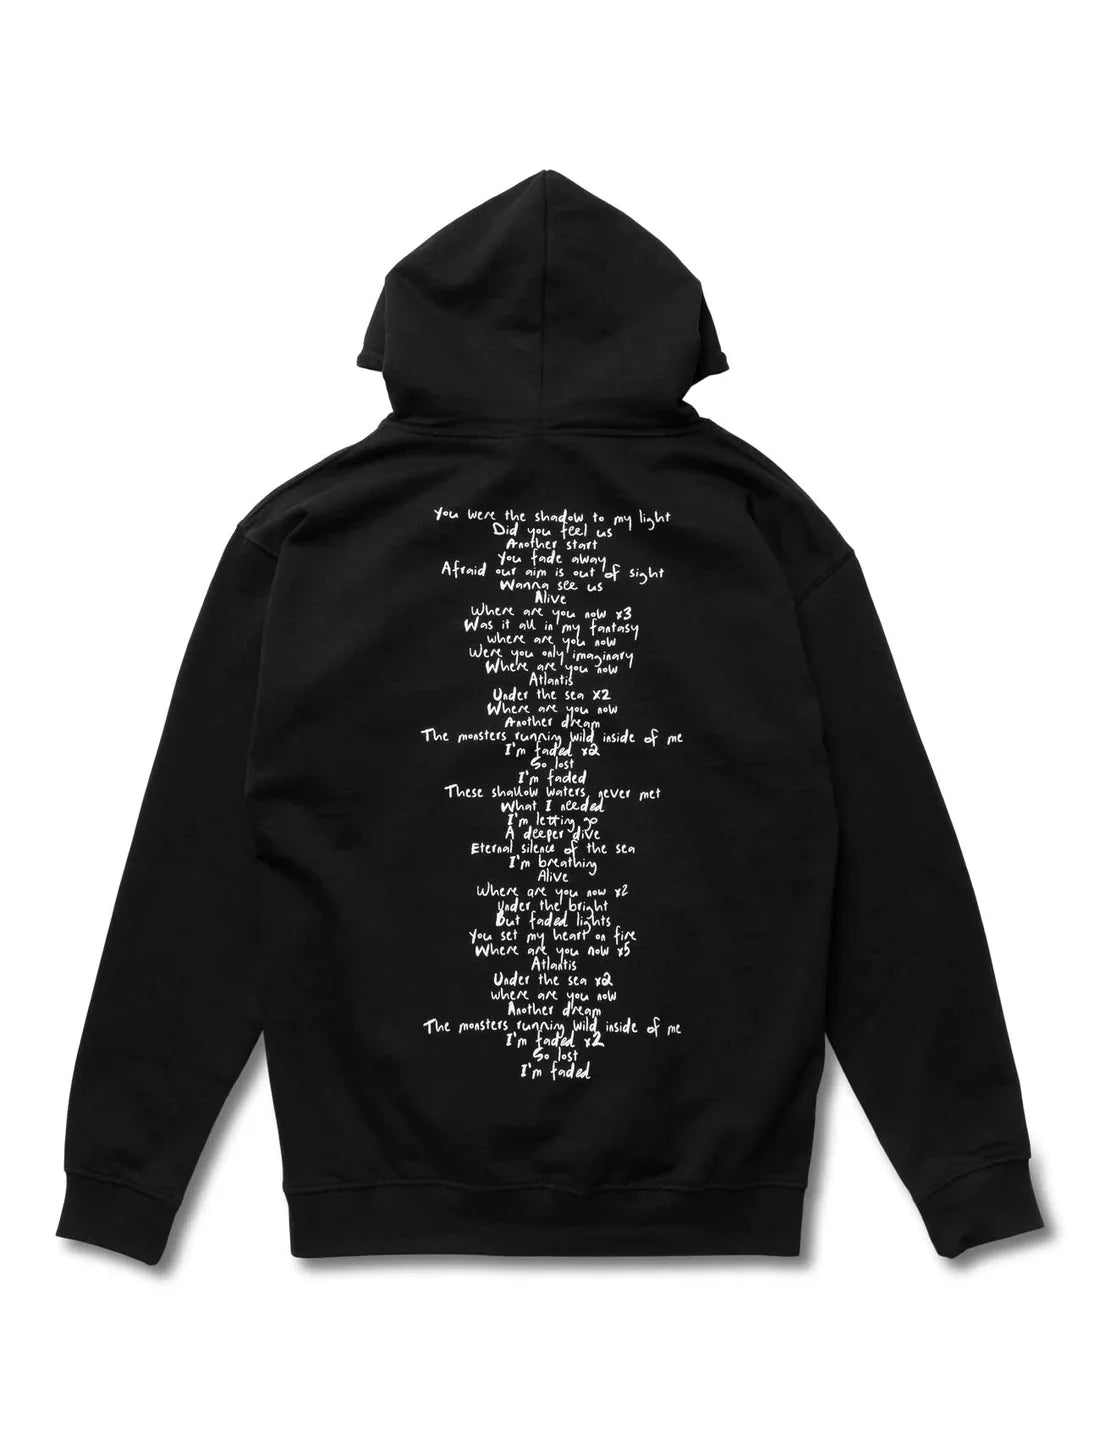 Back view of Alan Walker's Faded 2.0 Hoodie in black, displaying the song's lyrics in white text, artistically arranged down the center, presented on a white background."